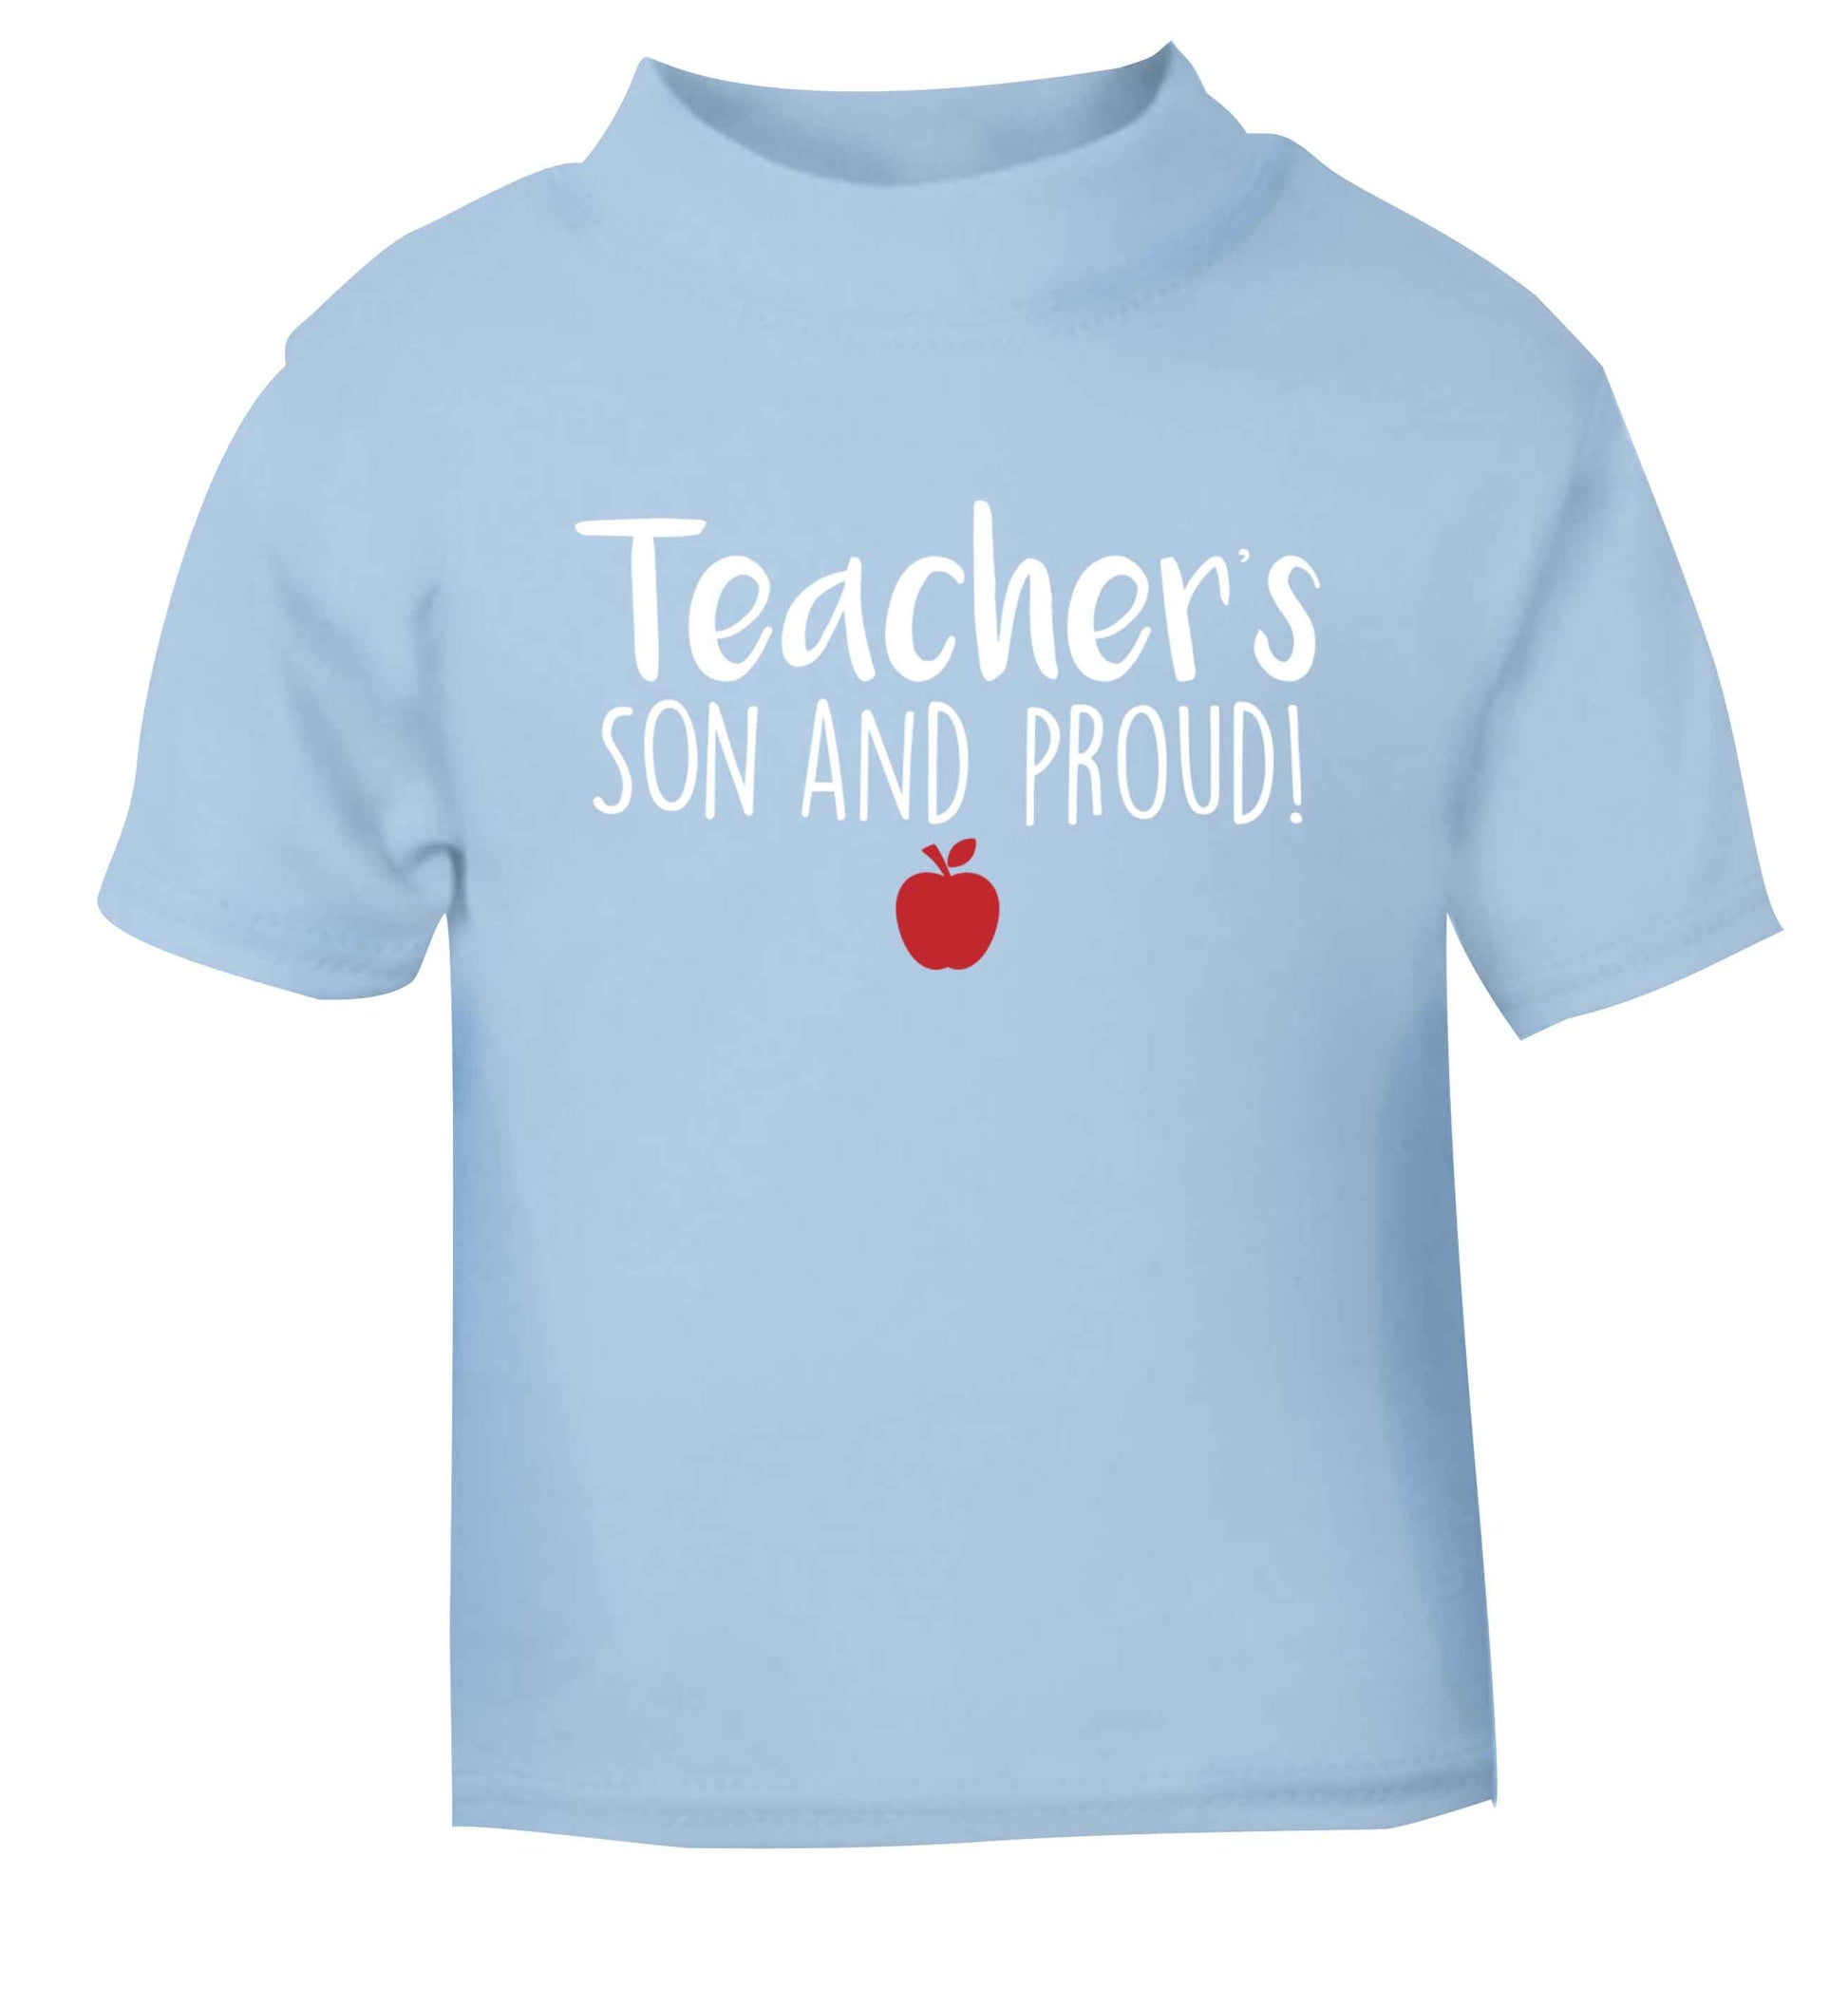 Teachers son and proud light blue baby toddler Tshirt 2 Years